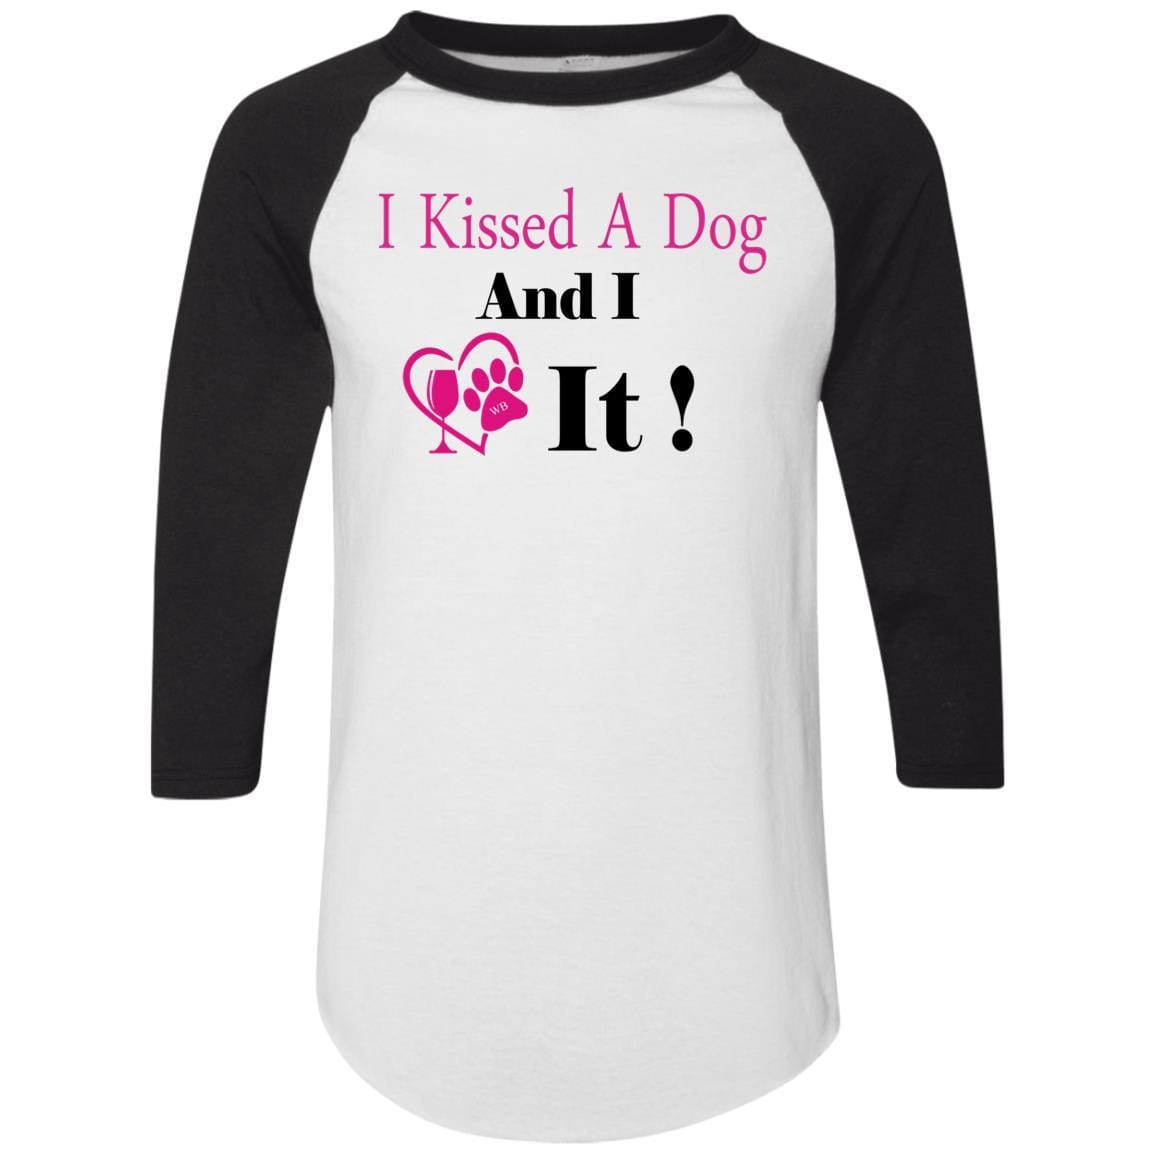 T-Shirts White/Black / S WineyBitches.co "I Kissed A Dog And I Loved It:" Colorblock Raglan Jersey WineyBitchesCo